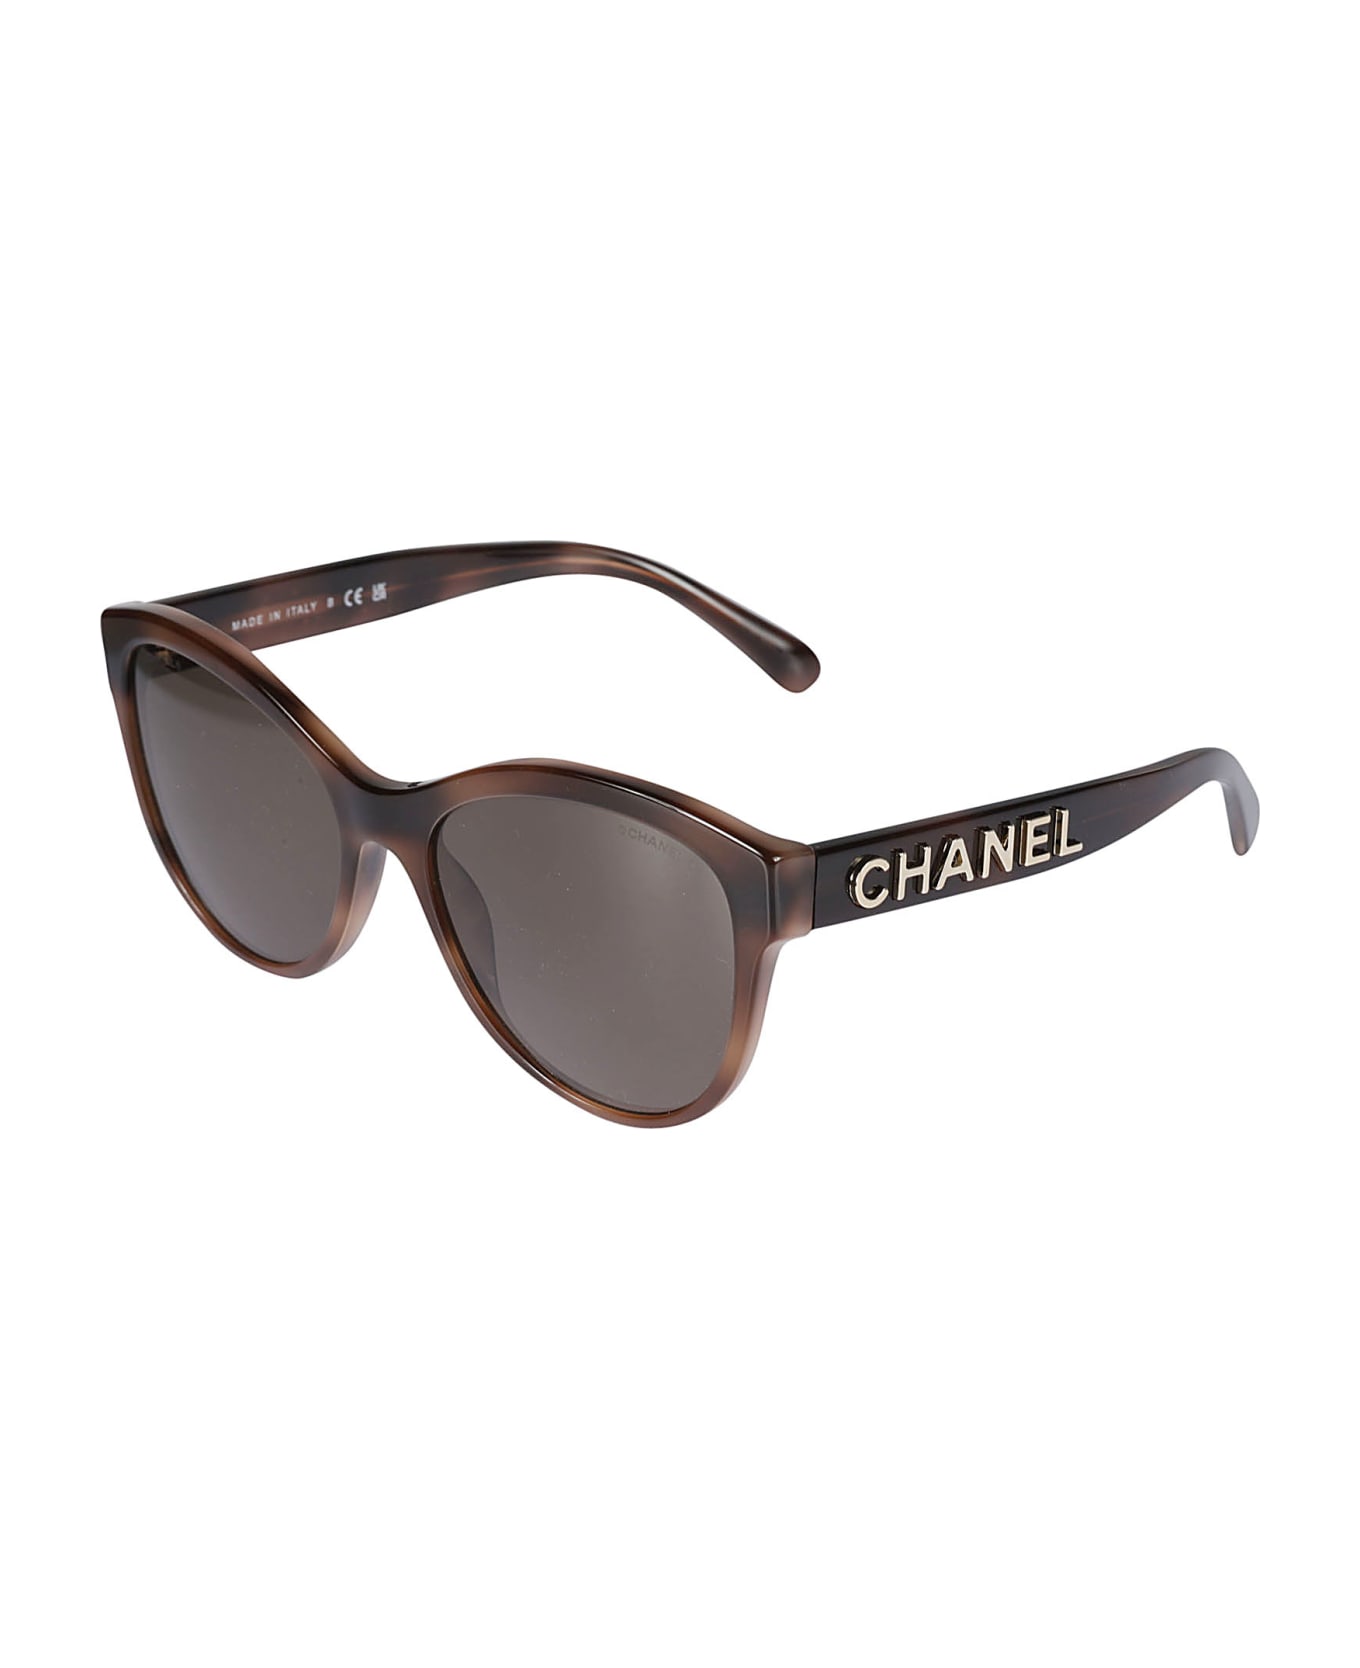 Chanel Butterfly Acetate Sunglasses - 1661/3 サングラス